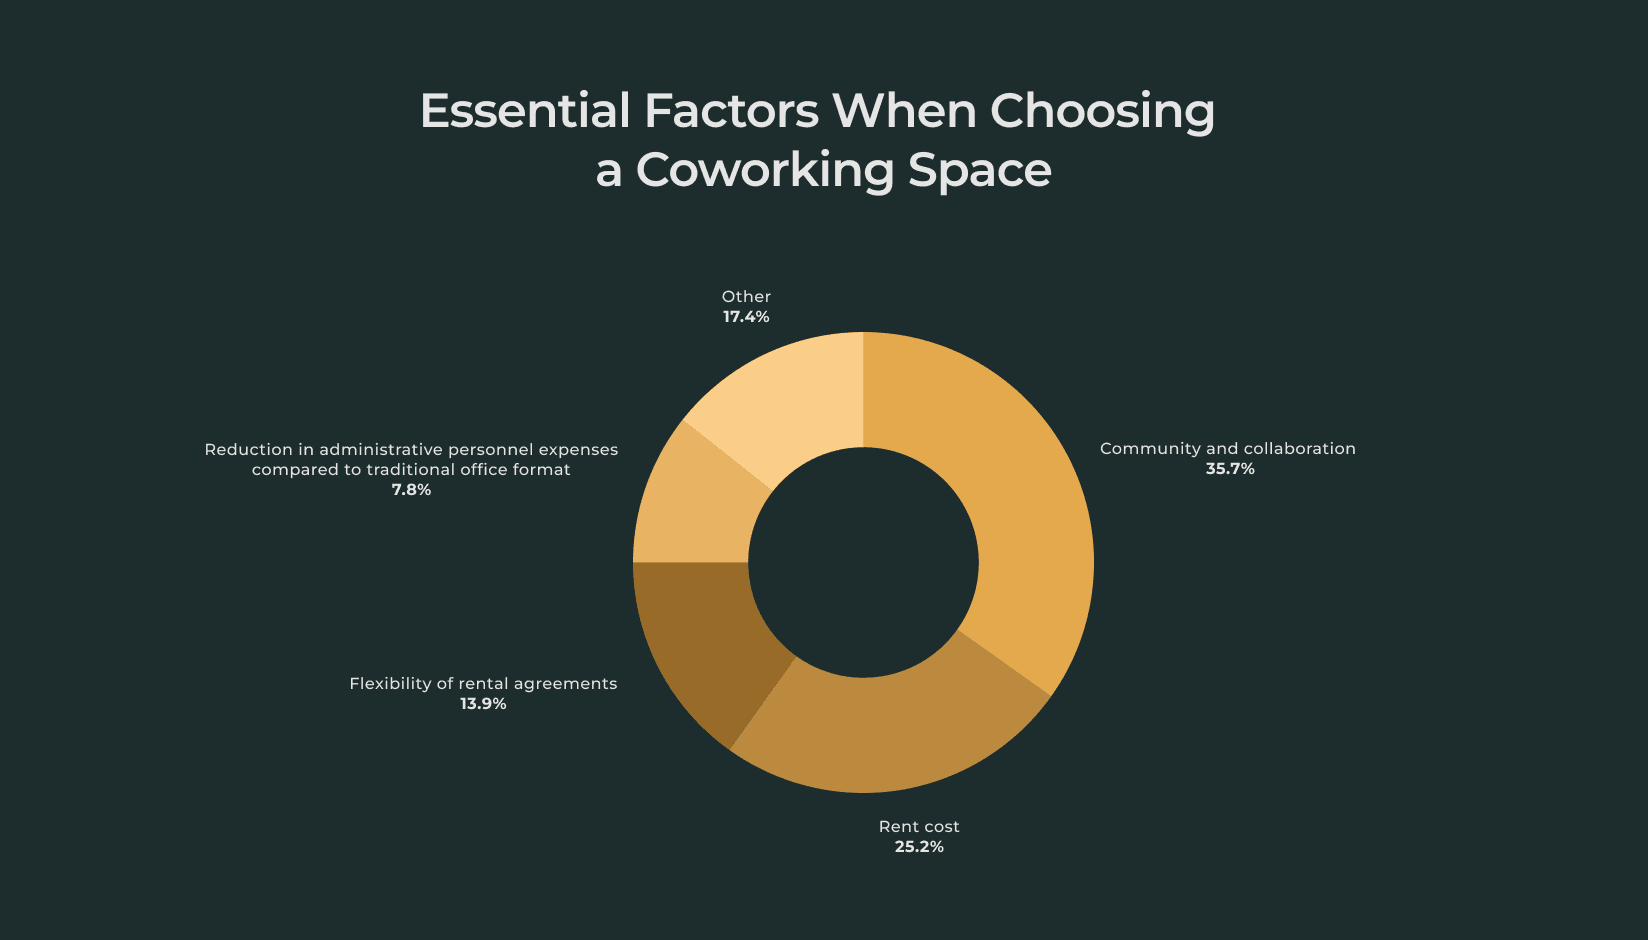 Essential factors when choosing a coworking space - andcards survey